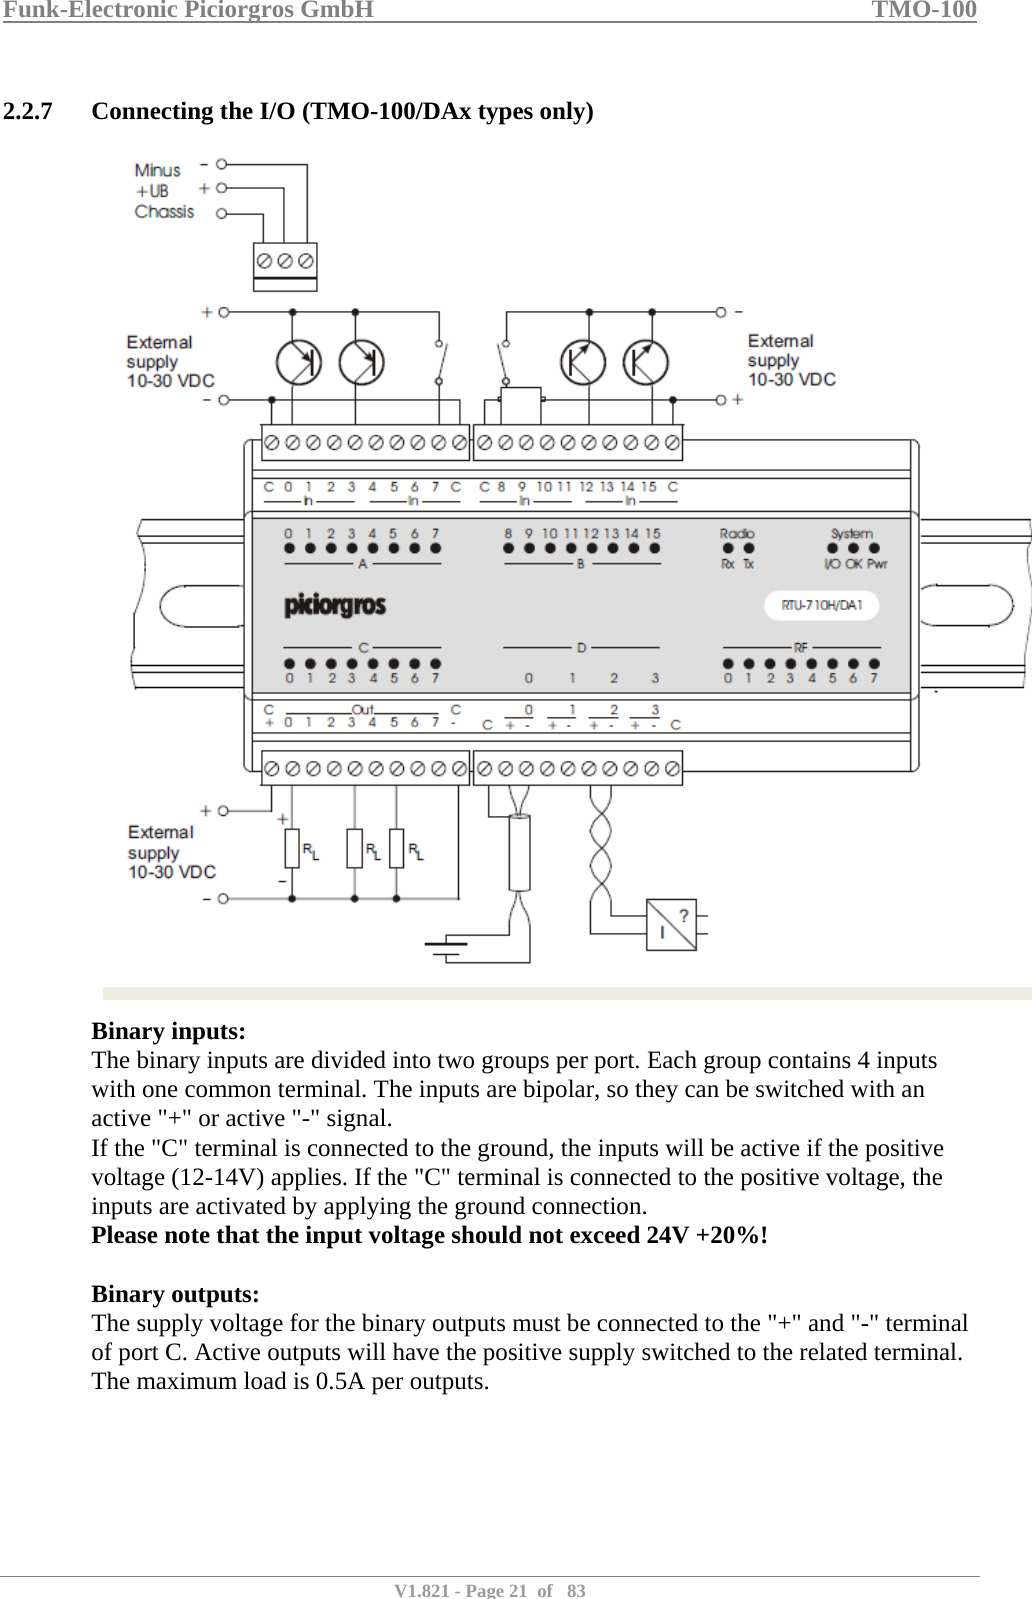 Funk-Electronic Piciorgros GmbH   TMO-100   V1.821 - Page 21  of   83   2.2.7 Connecting the I/O (TMO-100/DAx types only)   Binary inputs: The binary inputs are divided into two groups per port. Each group contains 4 inputs with one common terminal. The inputs are bipolar, so they can be switched with an active &quot;+&quot; or active &quot;-&quot; signal. If the &quot;C&quot; terminal is connected to the ground, the inputs will be active if the positive voltage (12-14V) applies. If the &quot;C&quot; terminal is connected to the positive voltage, the inputs are activated by applying the ground connection. Please note that the input voltage should not exceed 24V +20%!  Binary outputs: The supply voltage for the binary outputs must be connected to the &quot;+&quot; and &quot;-&quot; terminal of port C. Active outputs will have the positive supply switched to the related terminal. The maximum load is 0.5A per outputs.  